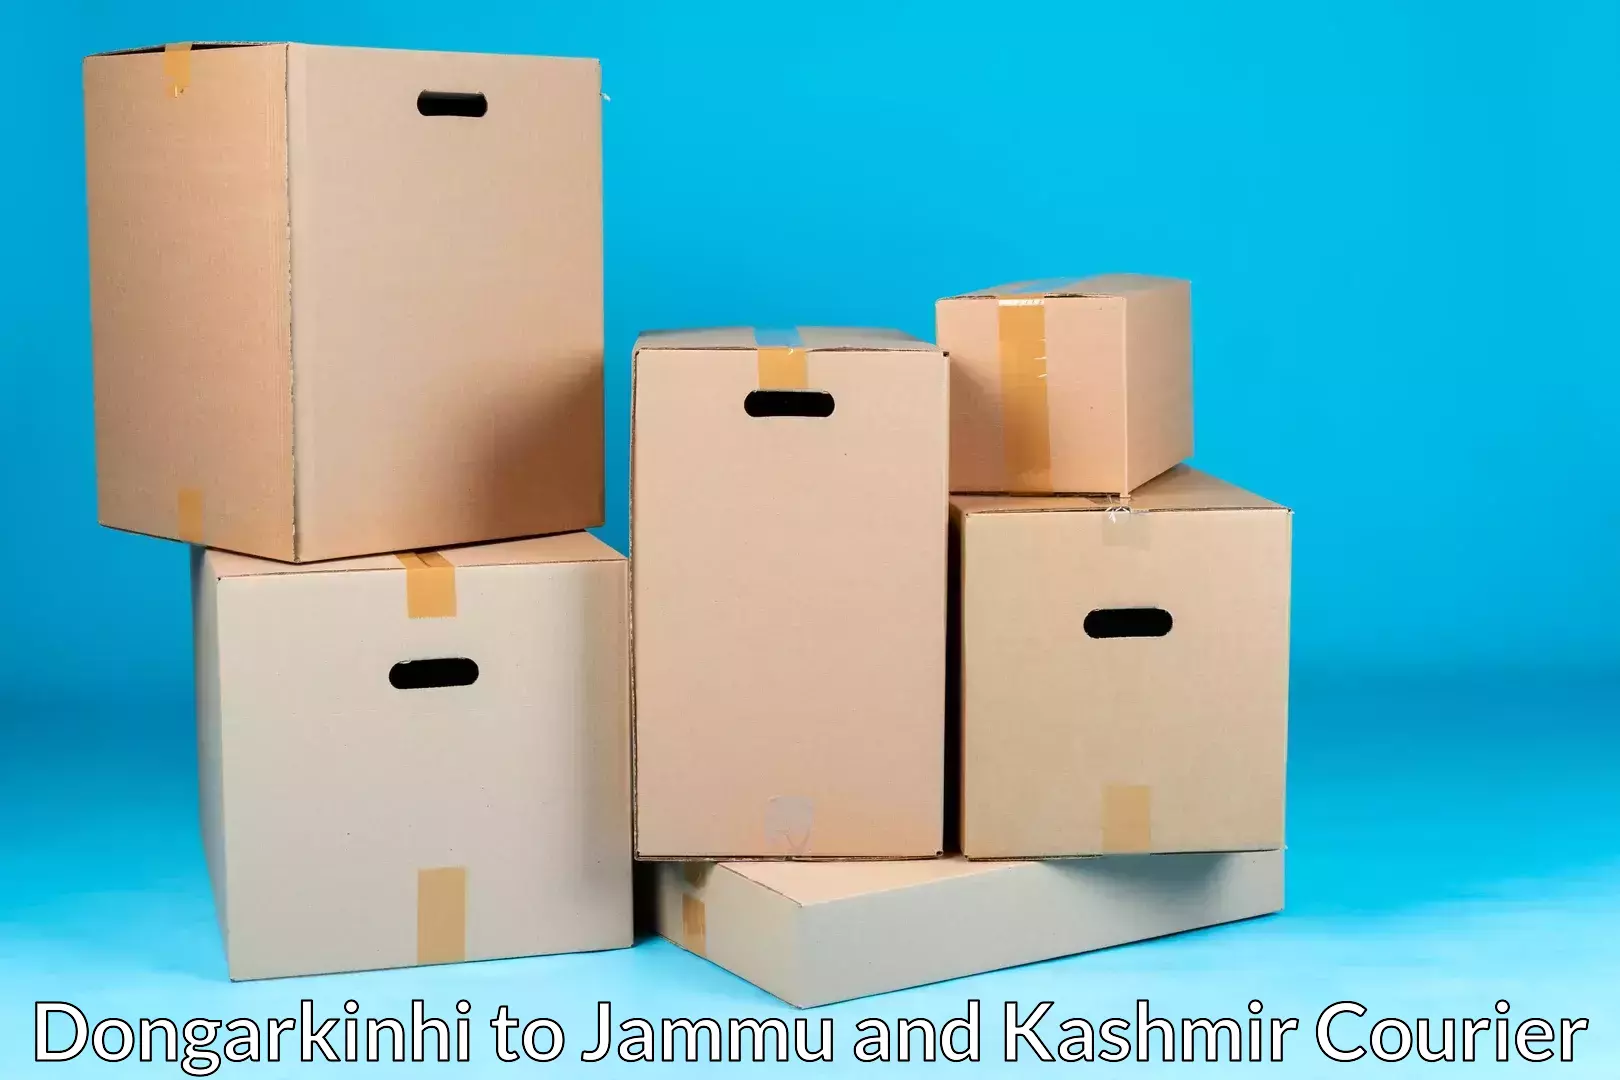 Professional furniture movers Dongarkinhi to Jakh